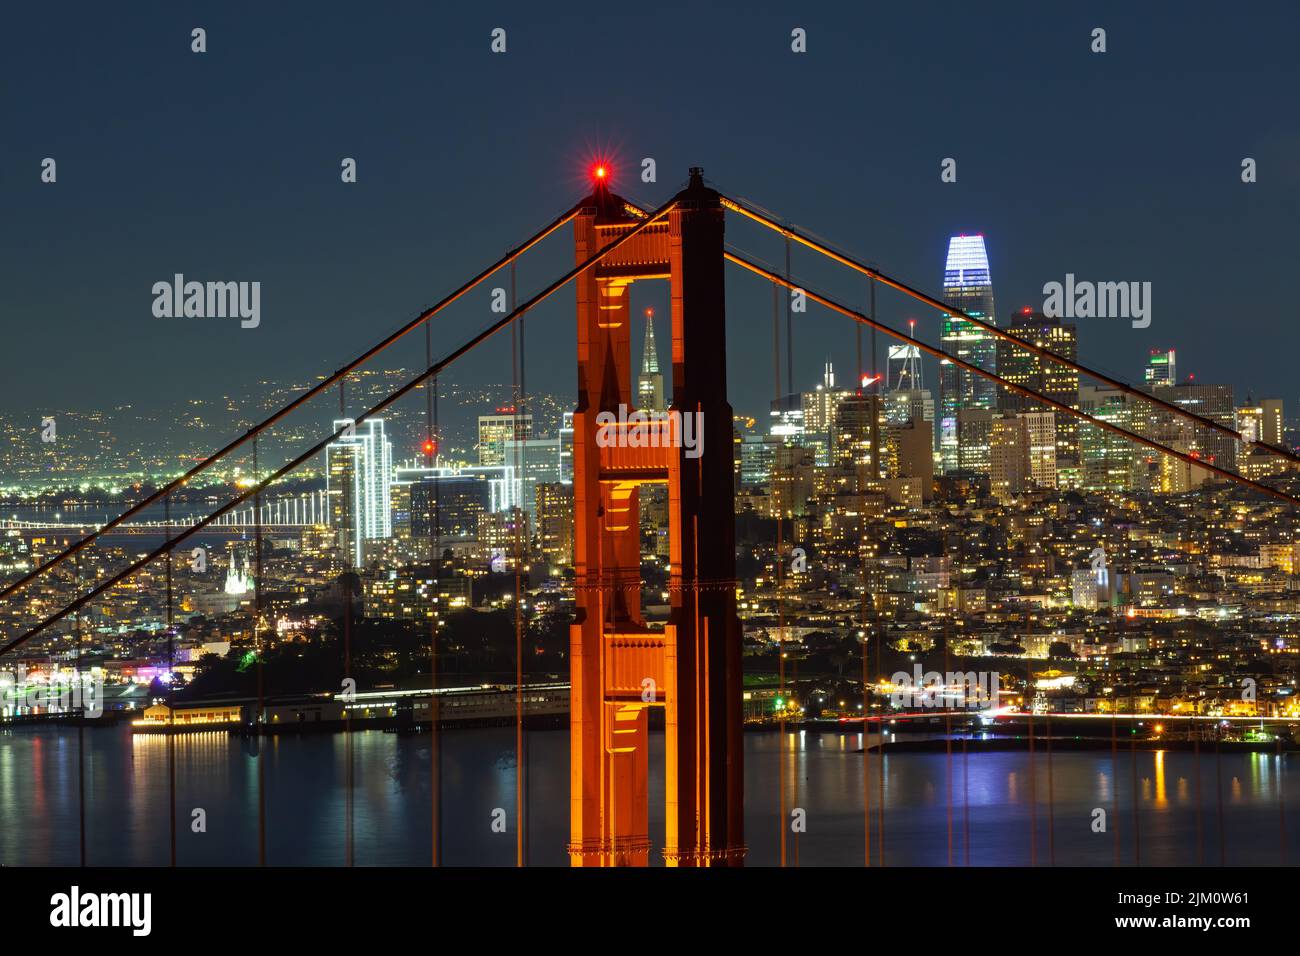 An aerial view of the Golden Gate bridge and the illuminated skyline of San Francisco at night Stock Photo